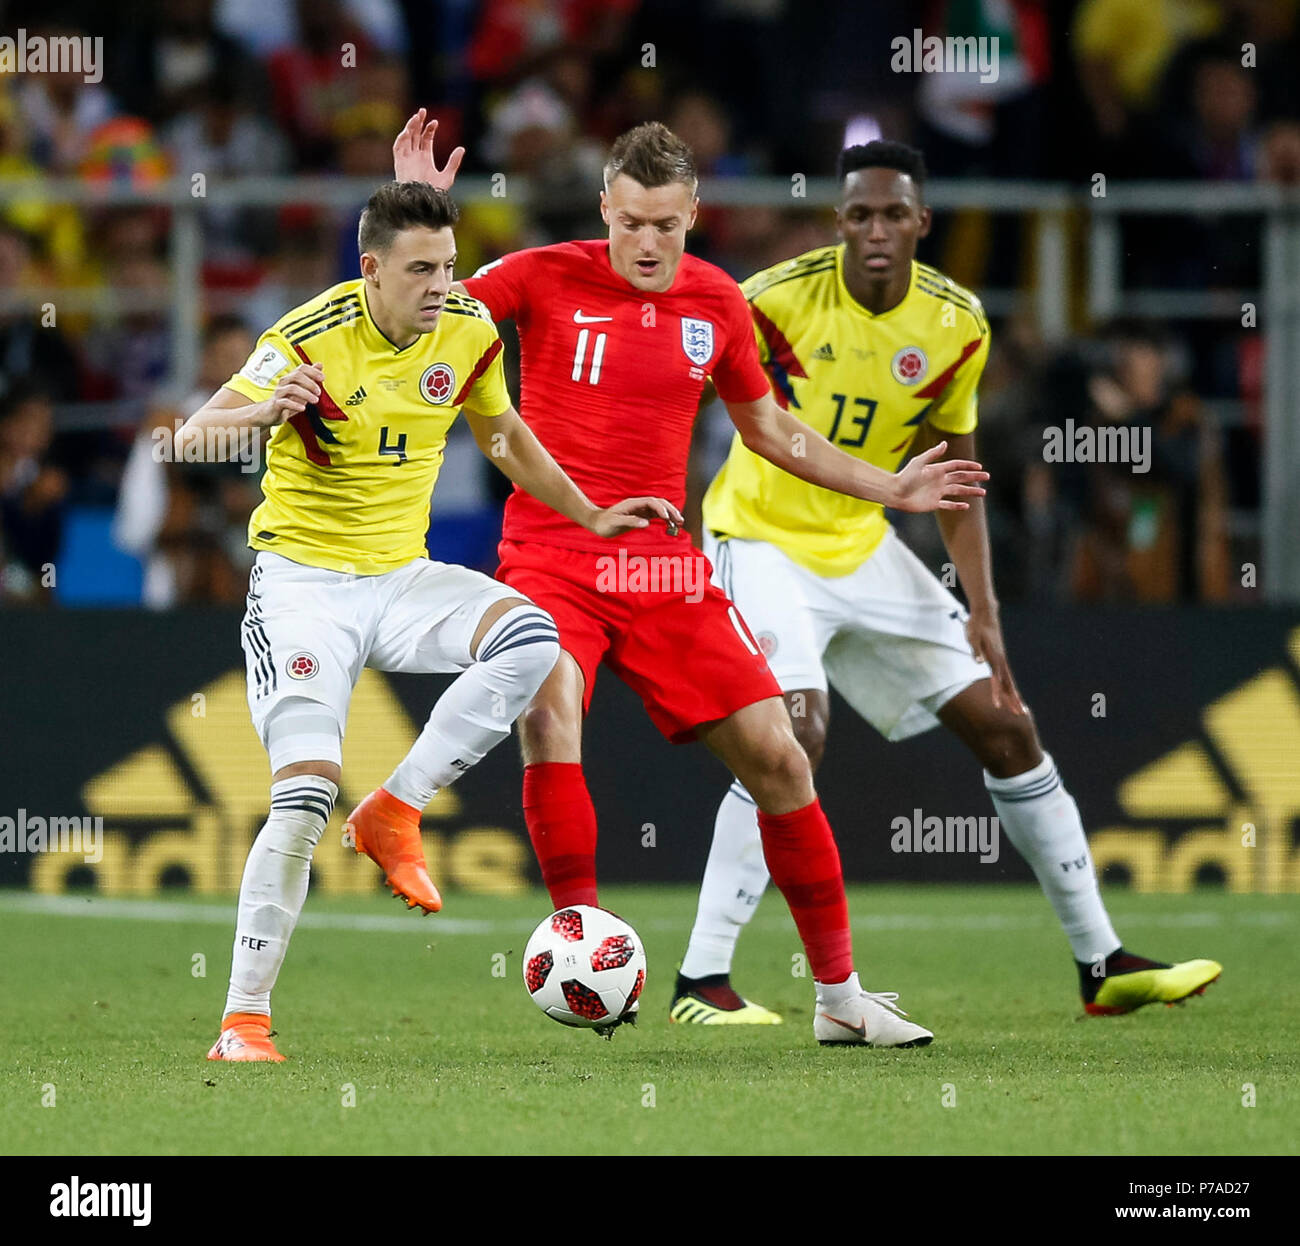 Moscow, Russia. 3rd July, 2018. Santiago Arias of Colombia, Jamie Vardy of England and Yerry Mina of Colombia during the 2018 FIFA World Cup Round of 16 match between Colombia and England at Spartak Stadium on July 3rd 2018 in Moscow, Russia. (Photo by Daniel Chesterton/phcimages.com) Credit: PHC Images/Alamy Live News Stock Photo